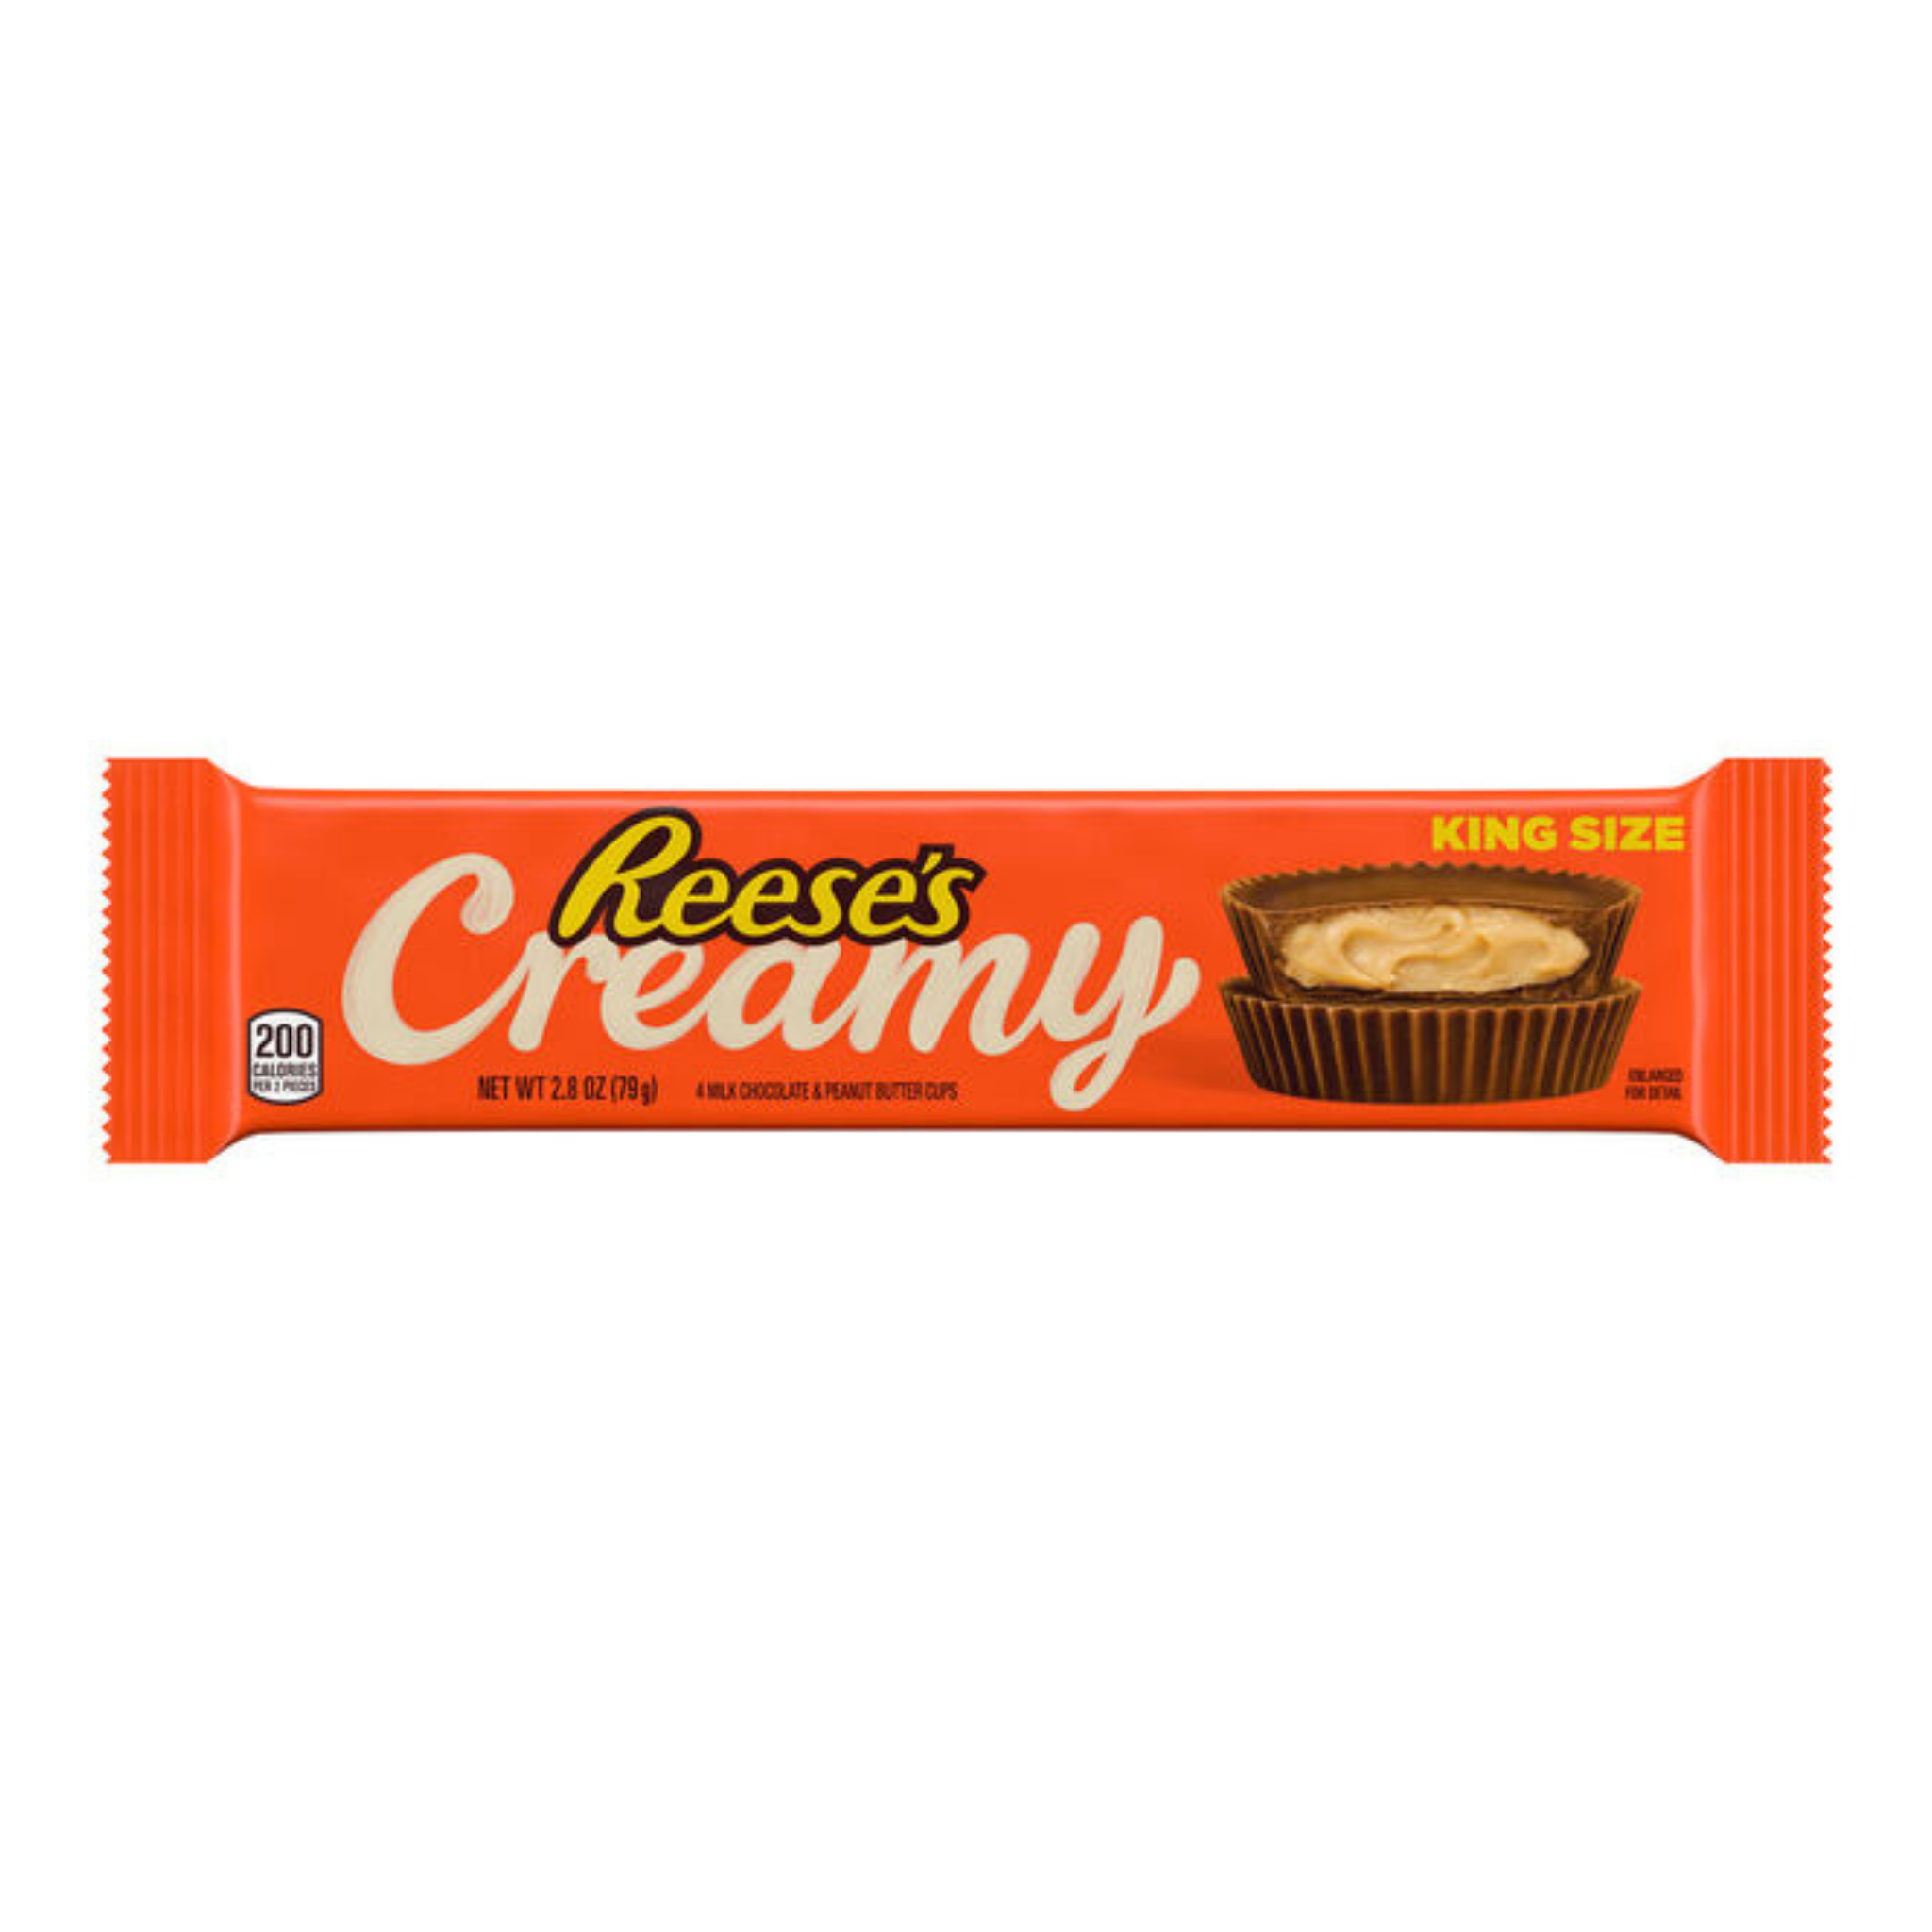 Reeses Creamy King Size